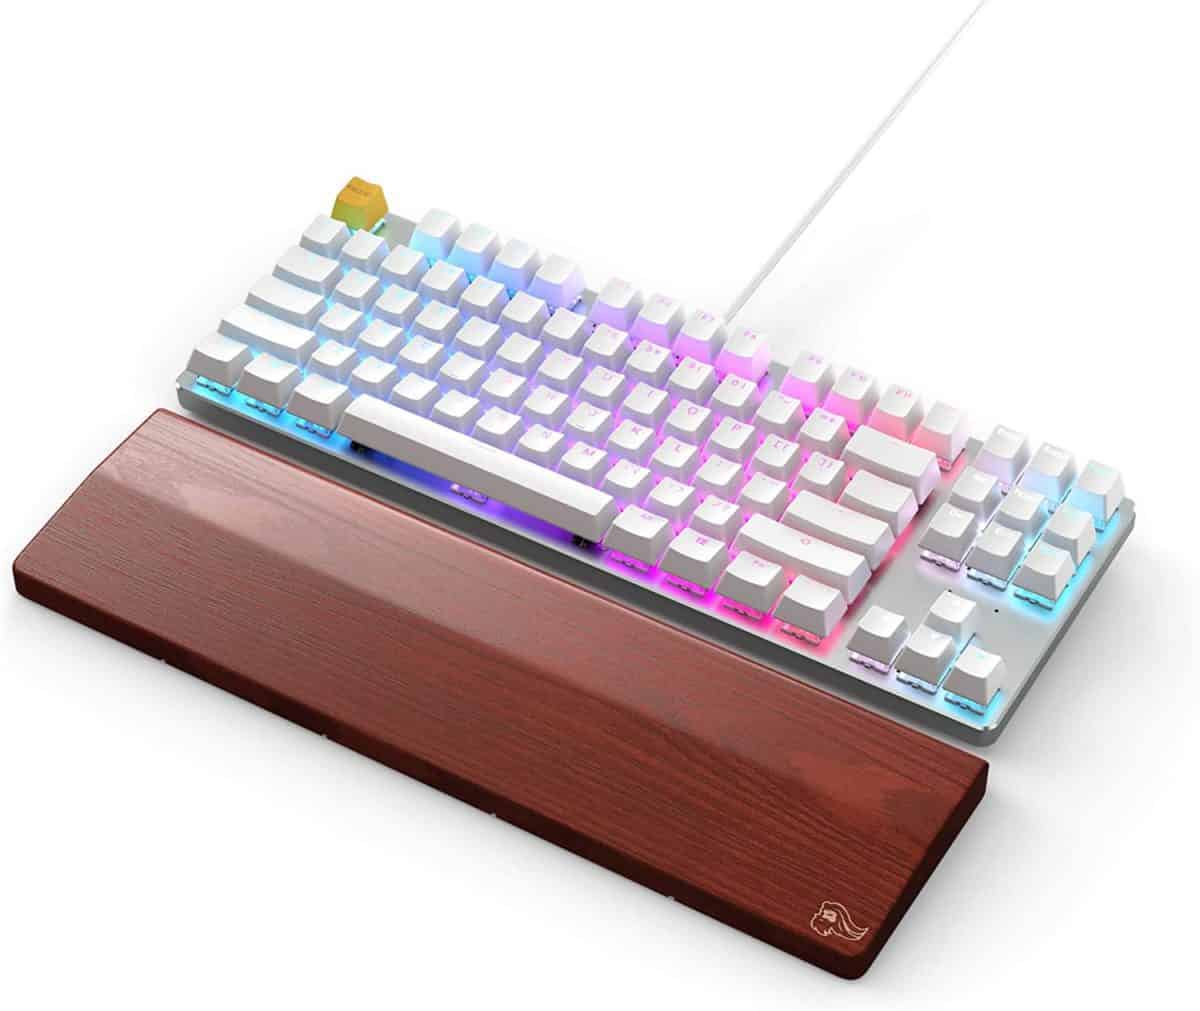 Glorious gaming wooden wrist rest